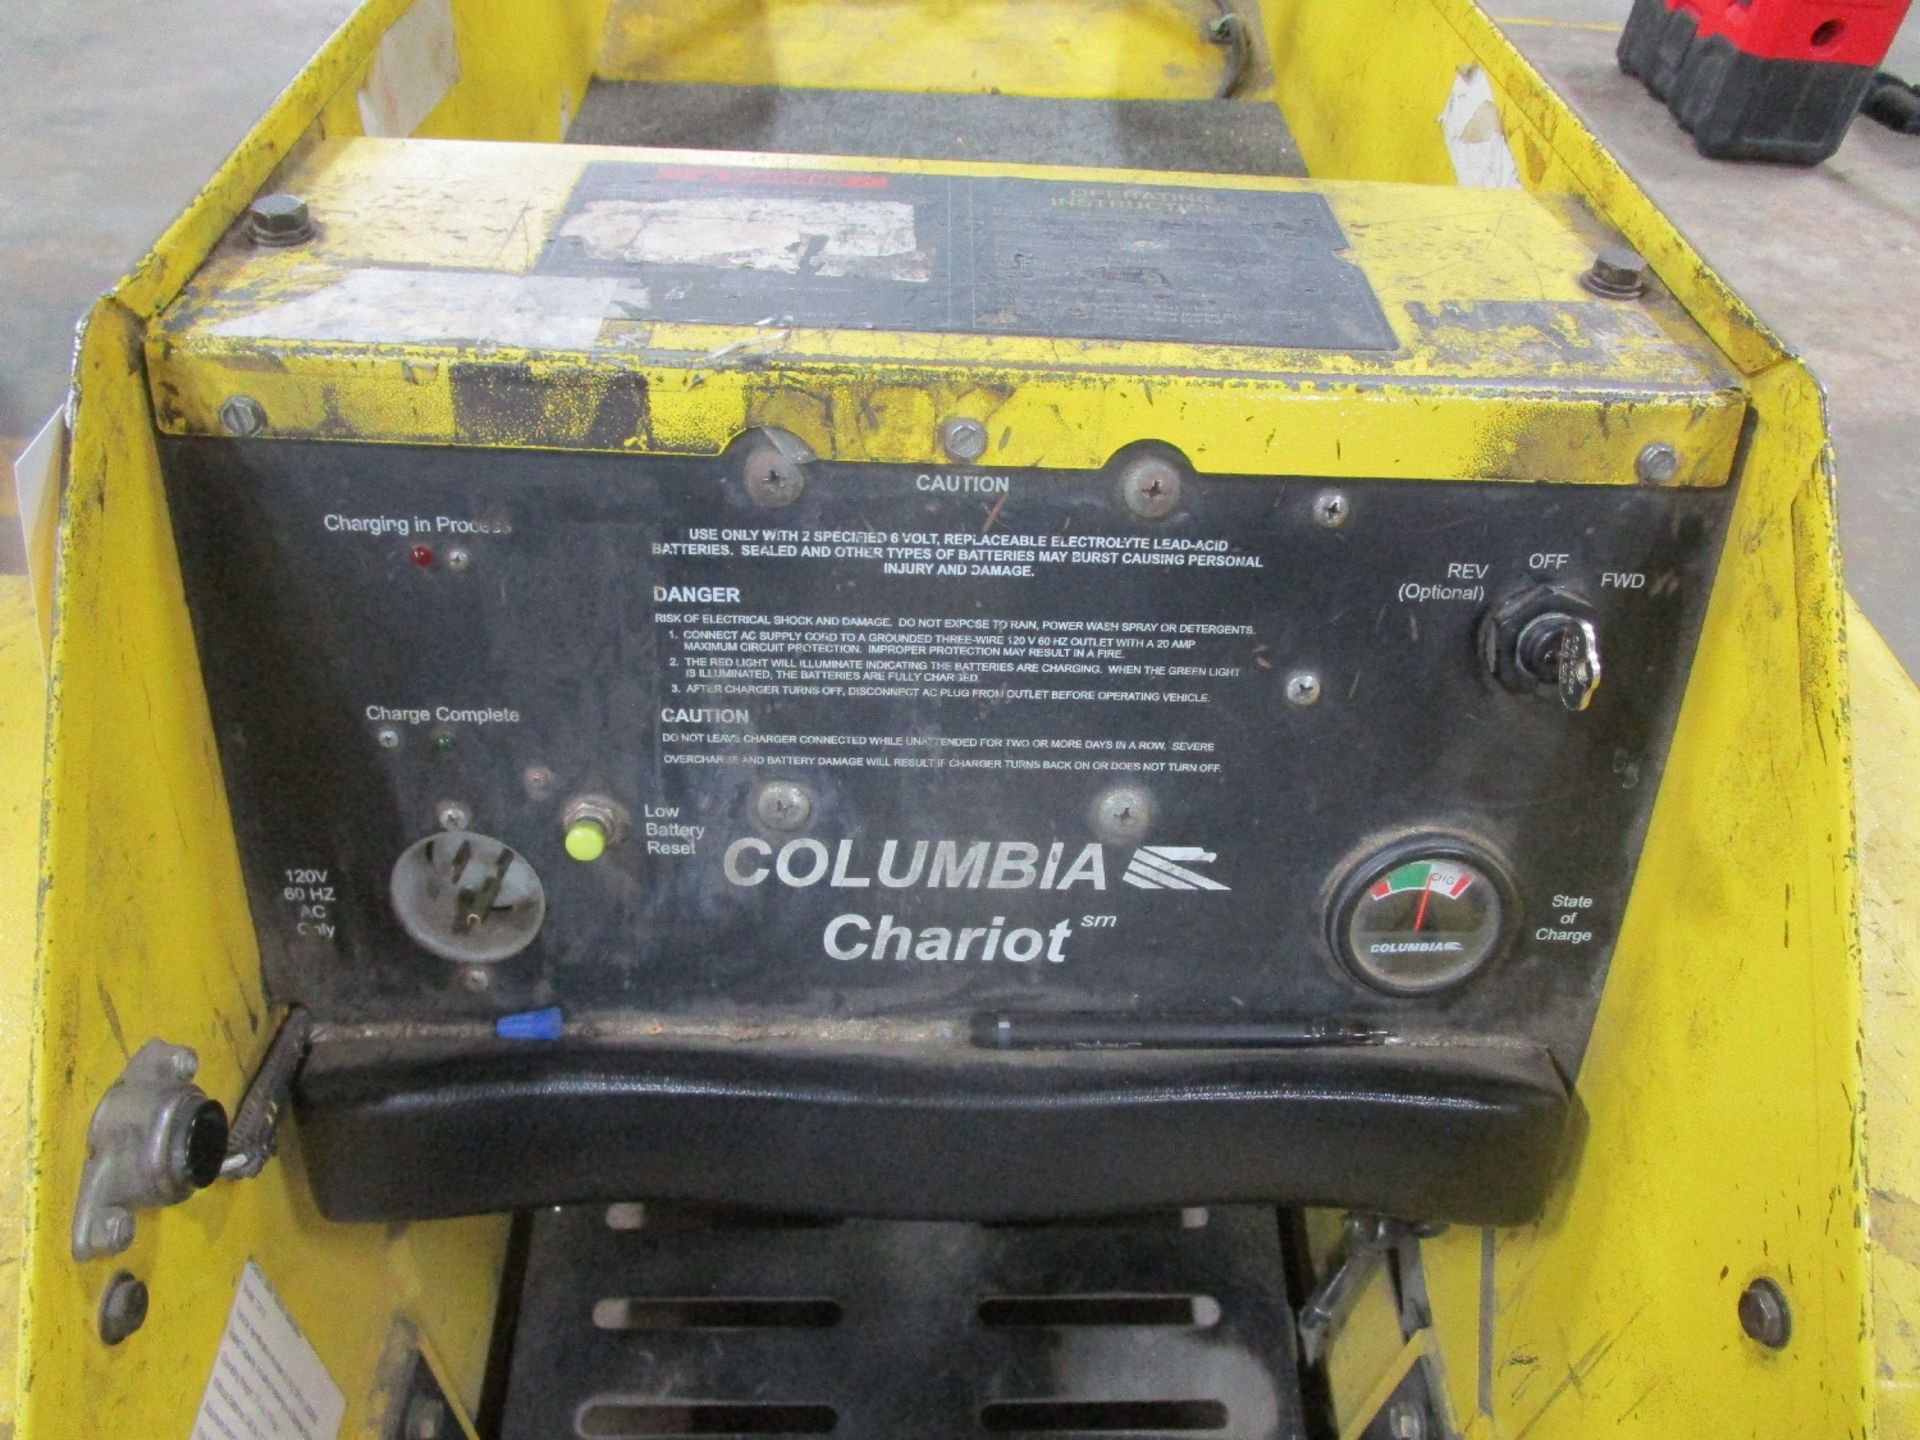 Columbia Chariot 100 12V Electric Utility Vehicle - Image 2 of 3